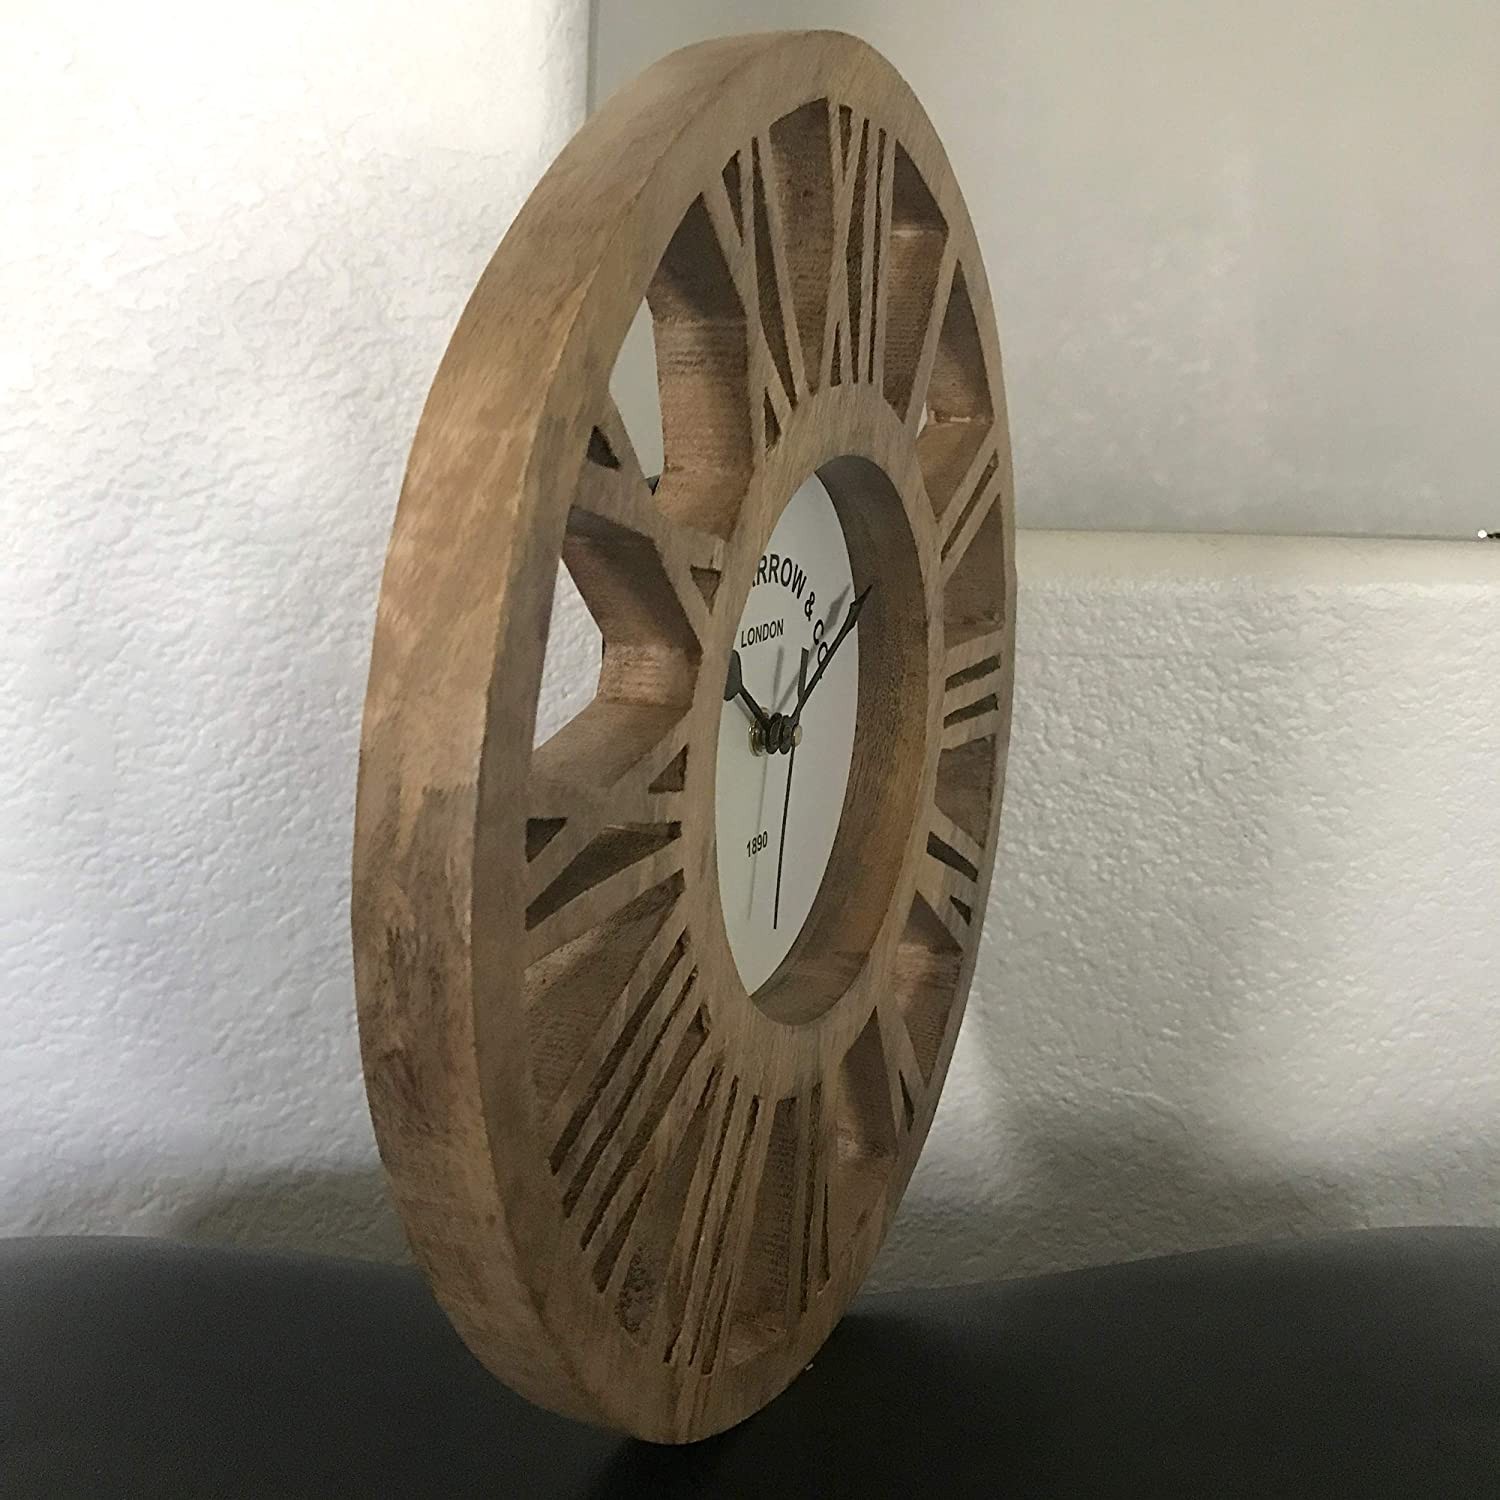 Decorshore 12 Inches Round Rustic Wood Wall Clock Carved Design